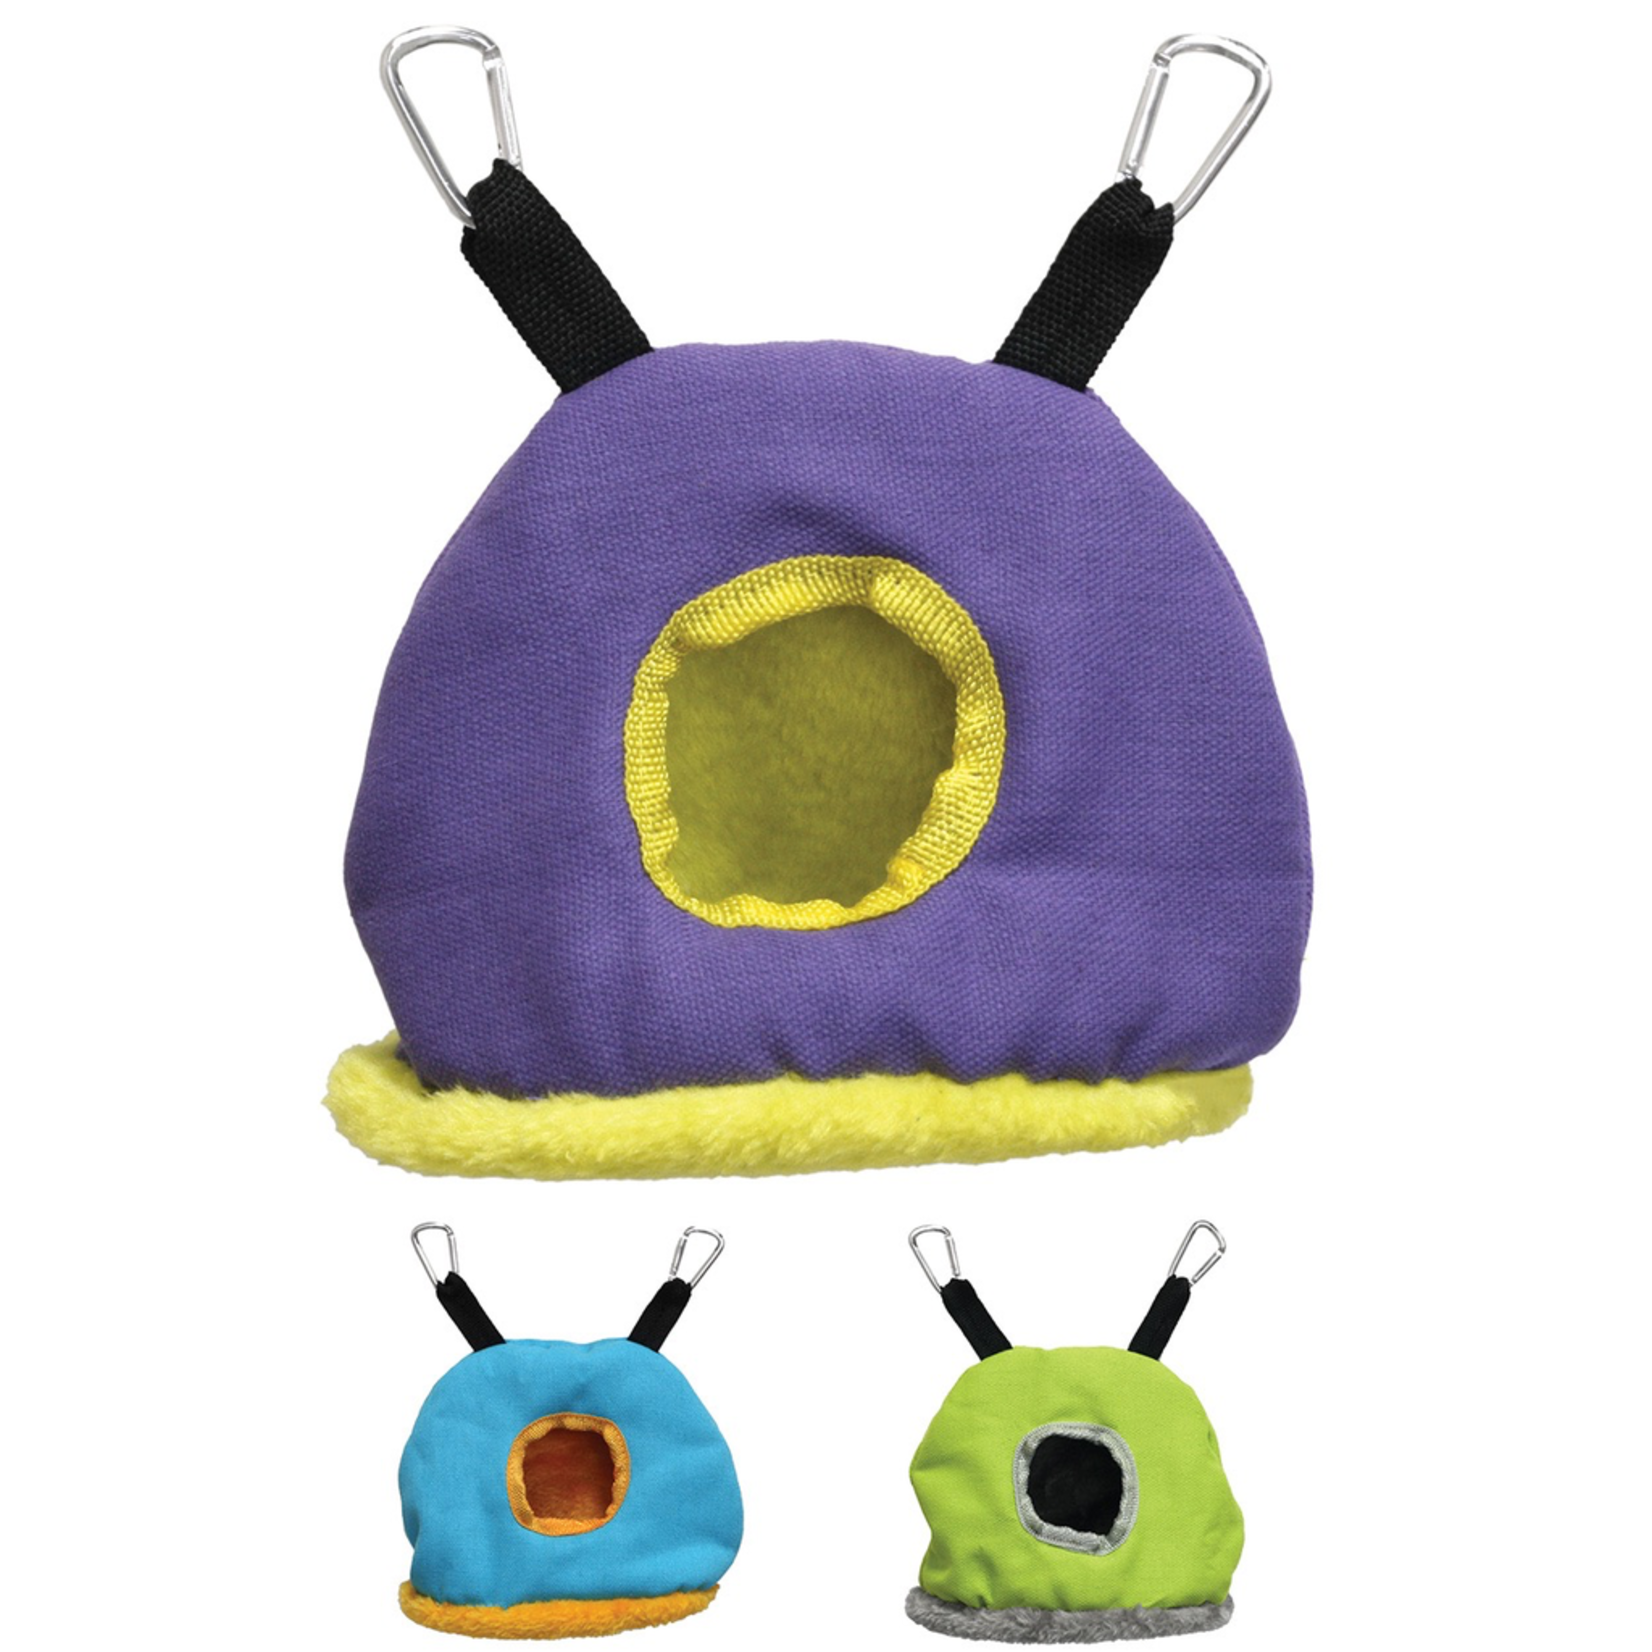 PREVUE PETS Snuggle Sack - Assorted Colors - Small